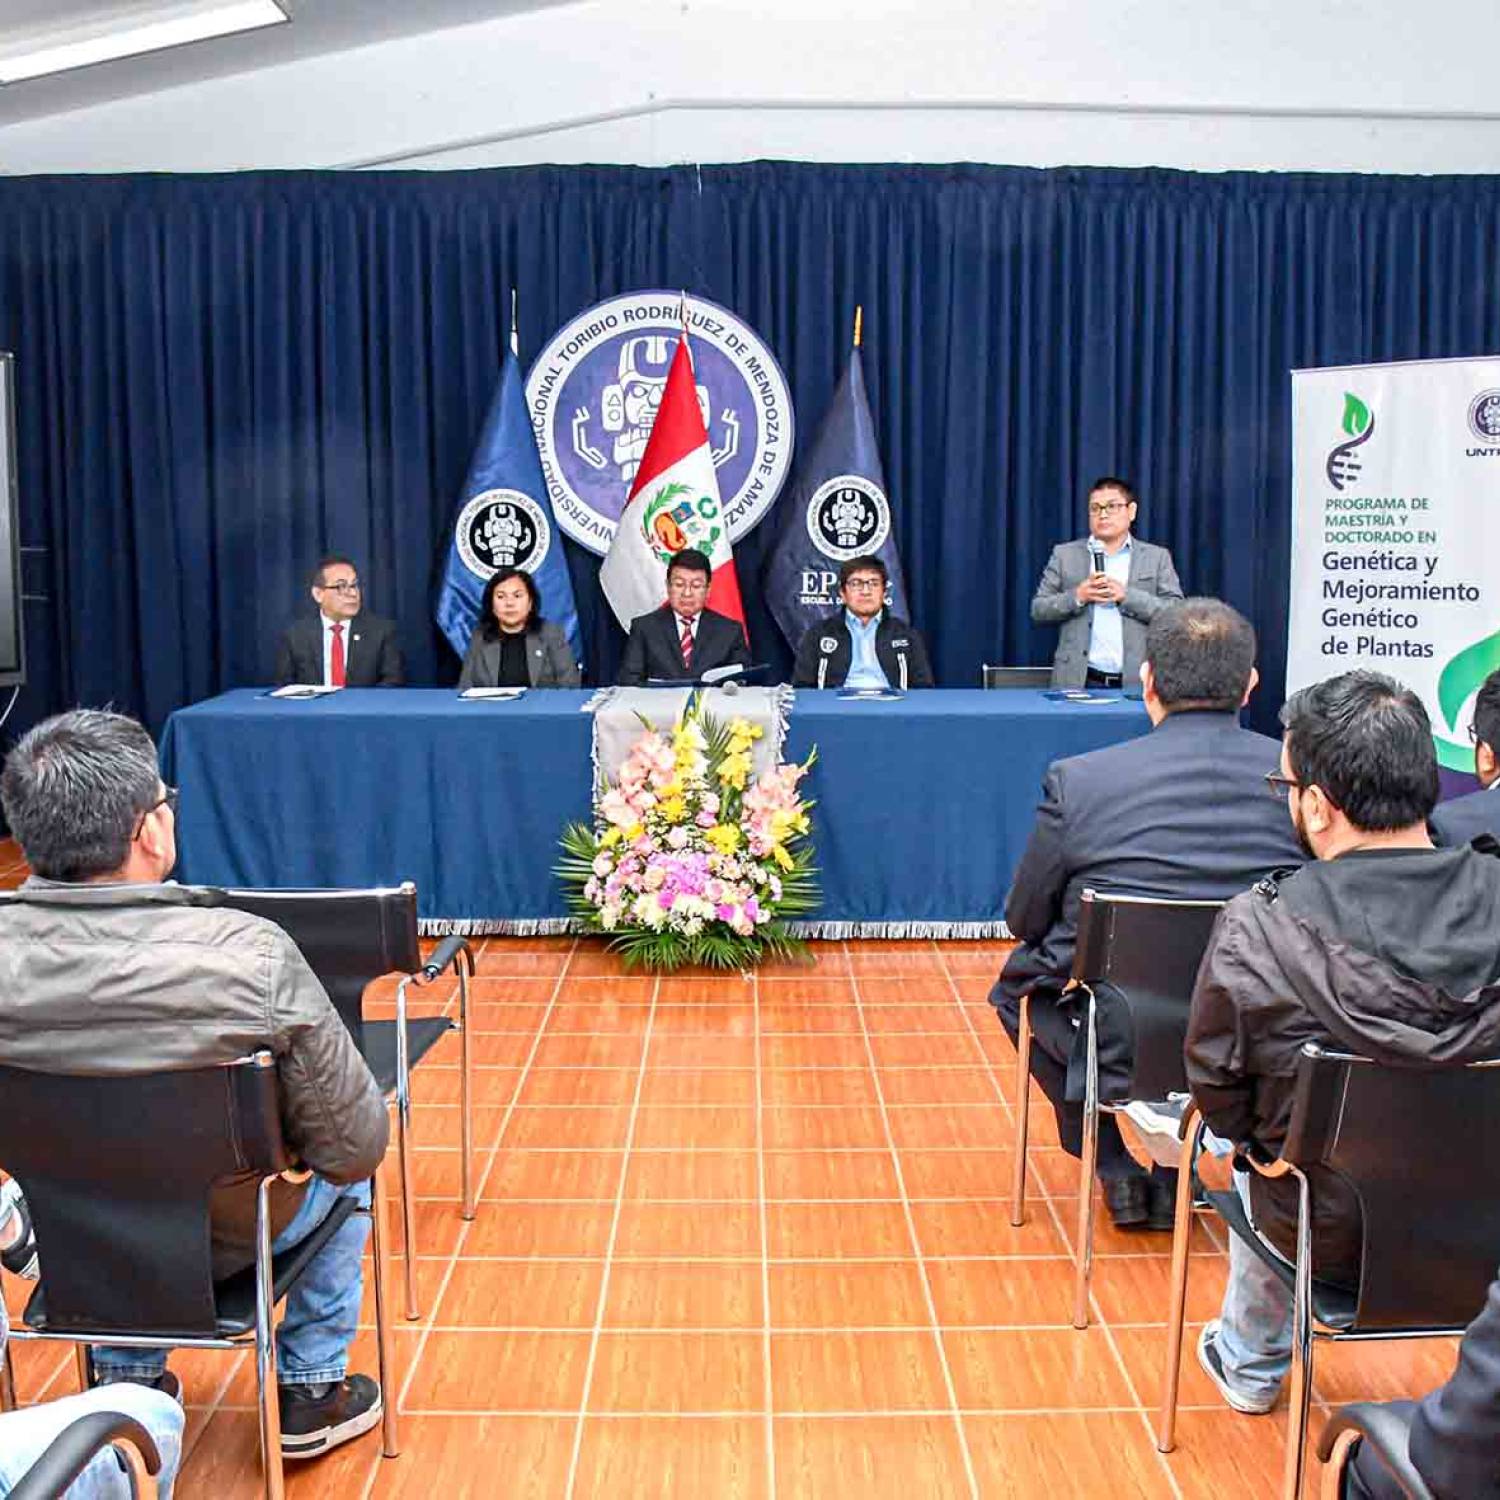 UNTRM launches the first Doctoral Program in Plant Genetics and Breeding in Peru, as well as one of the first master programs in this area